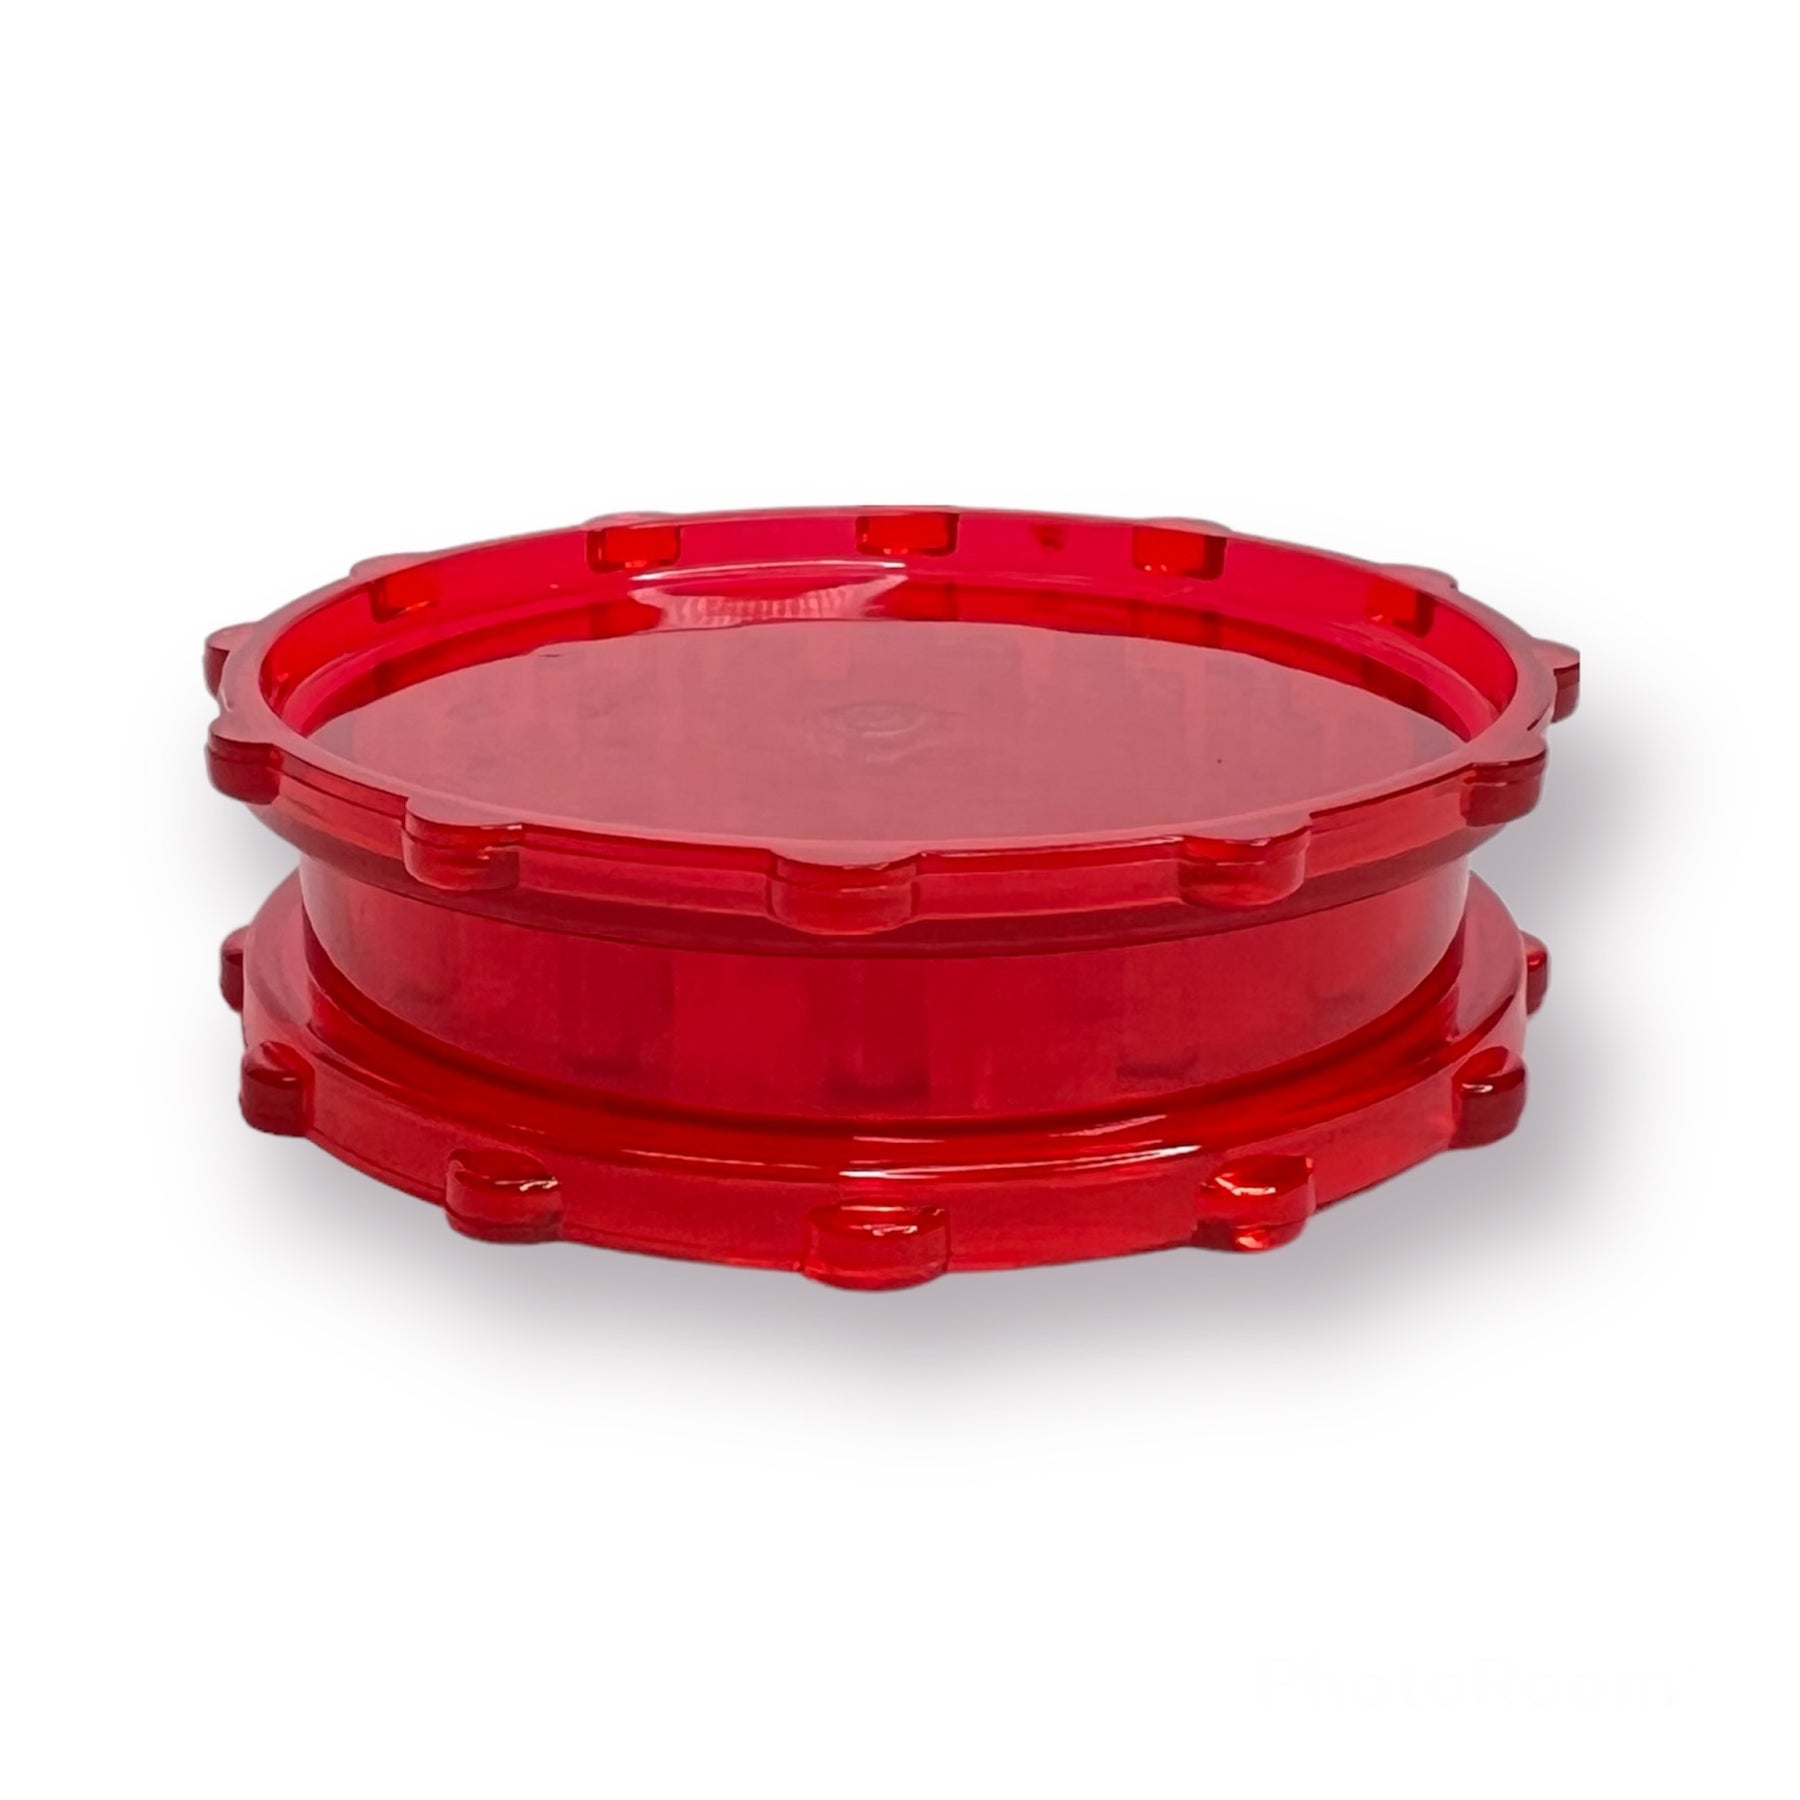 2 Piece Grinder with Magnet - Red